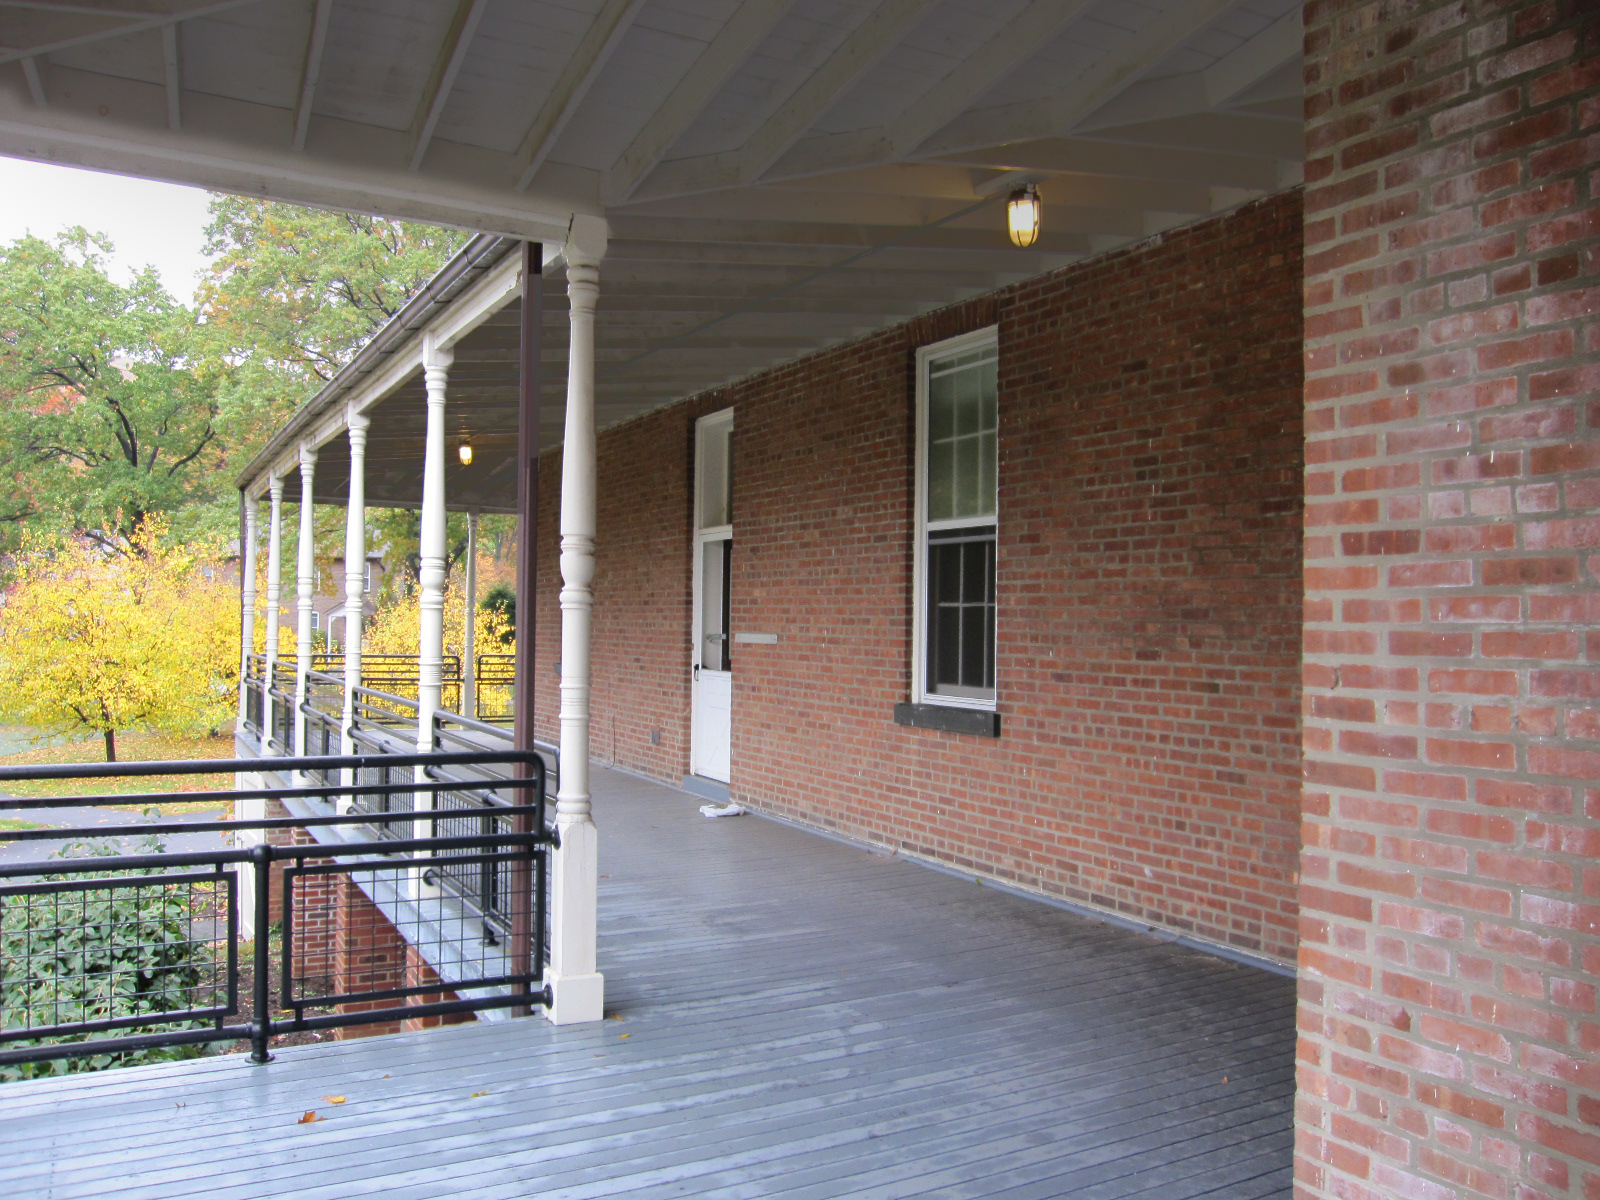 Community Center at West Point. Tobin Parnes Design. West Point, New York. Cultural and Institutional. Porch View.